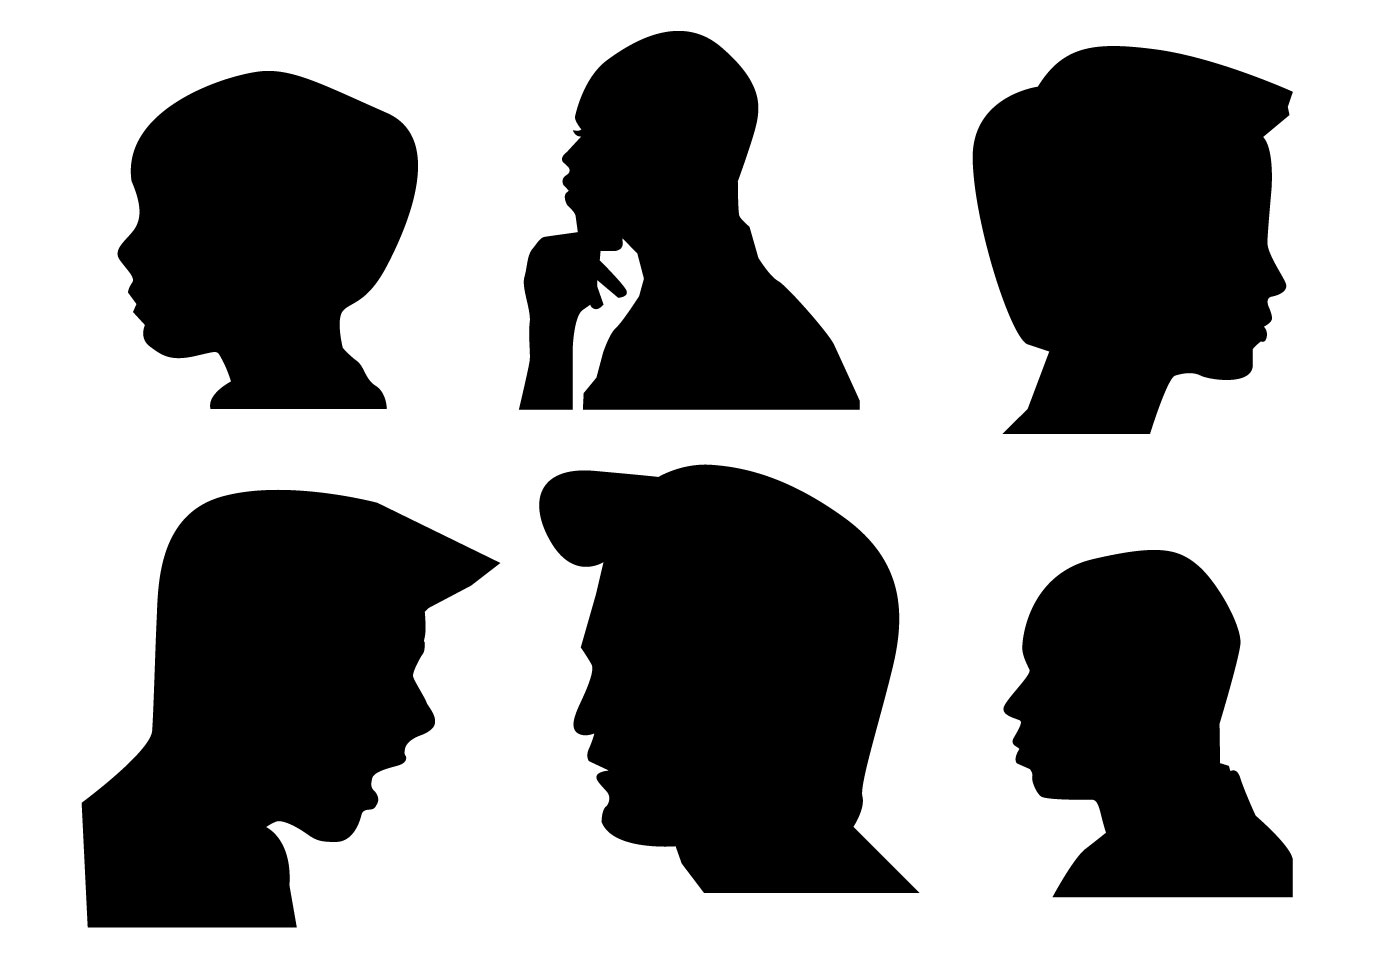 Silhouette Free Vector Art - (7222 Free Downloads)